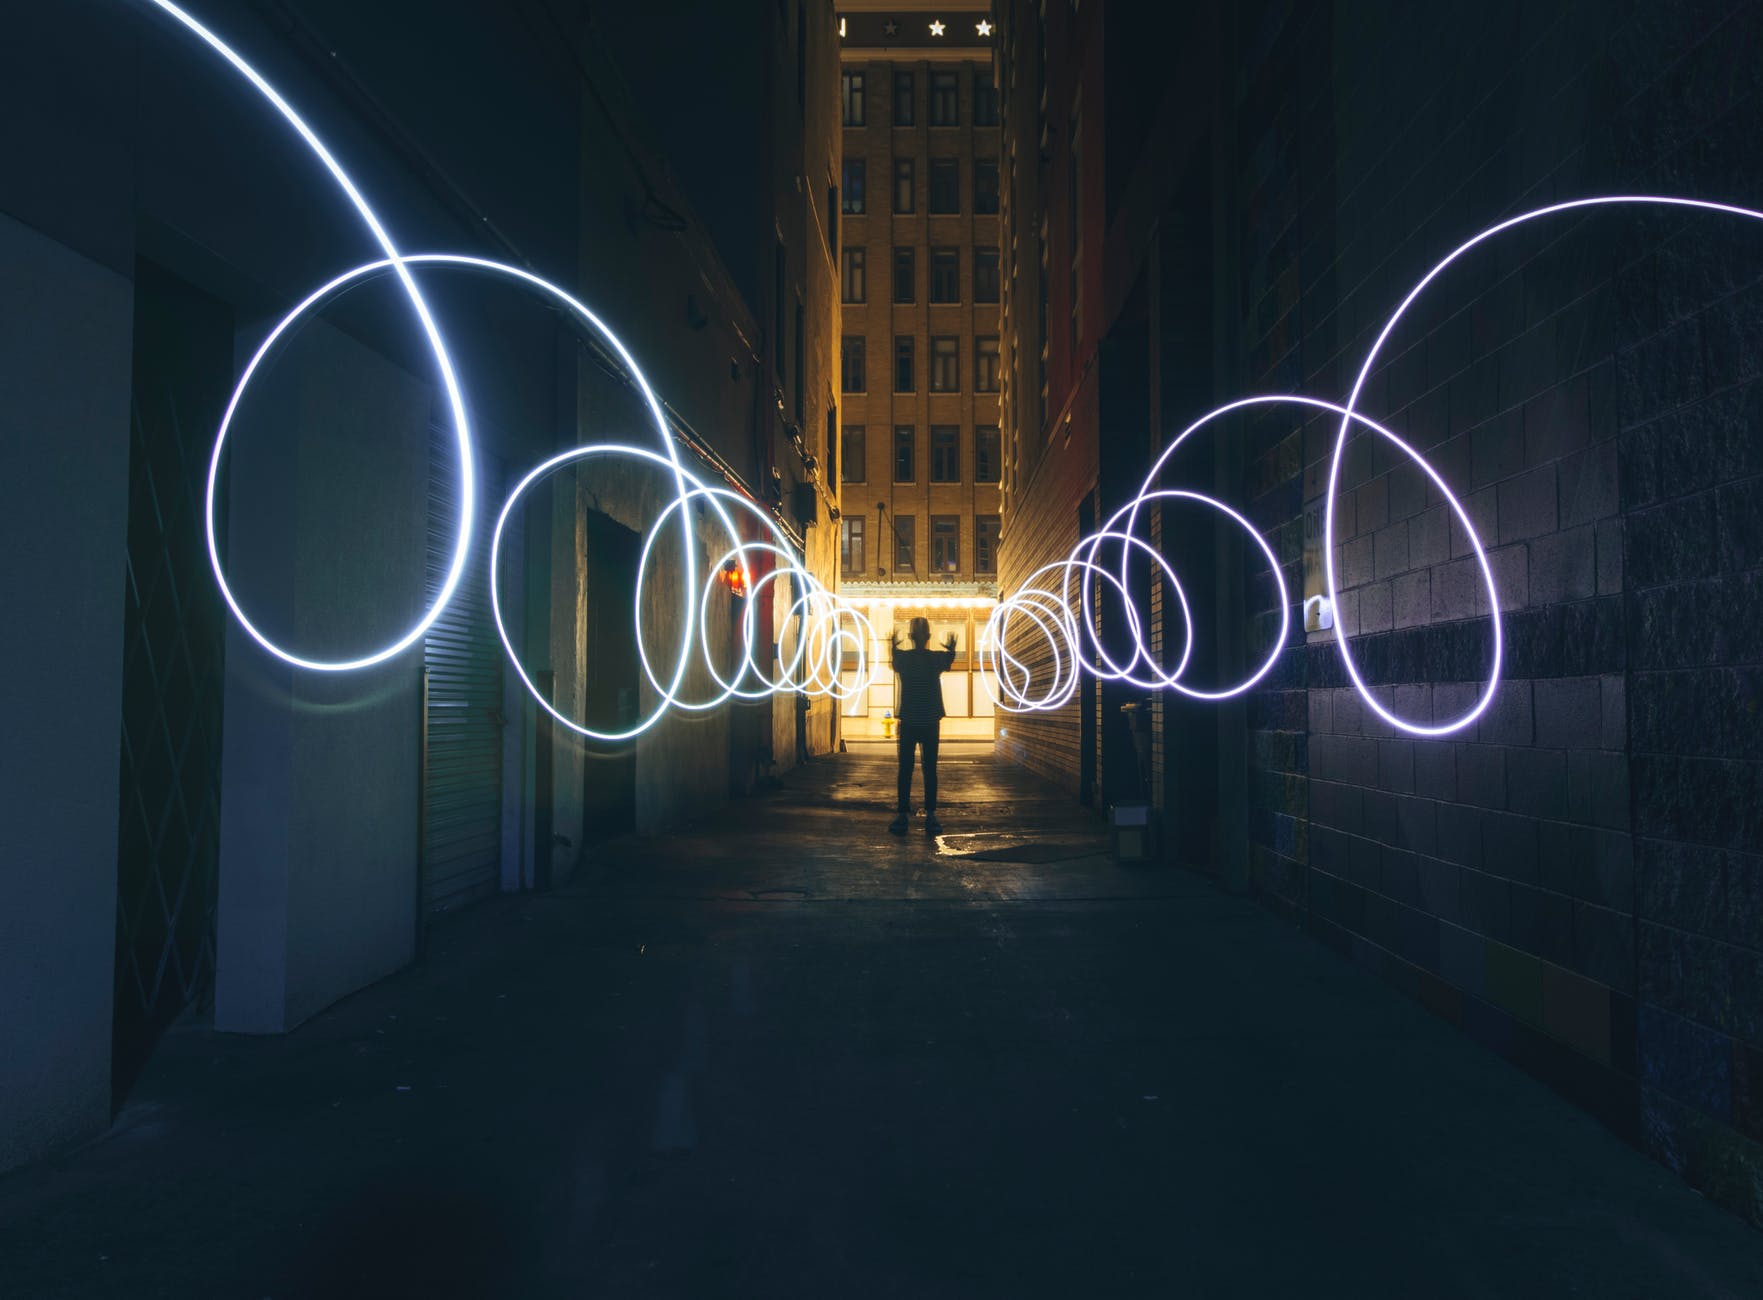 silhouette of person making circles with flashlight on dark street